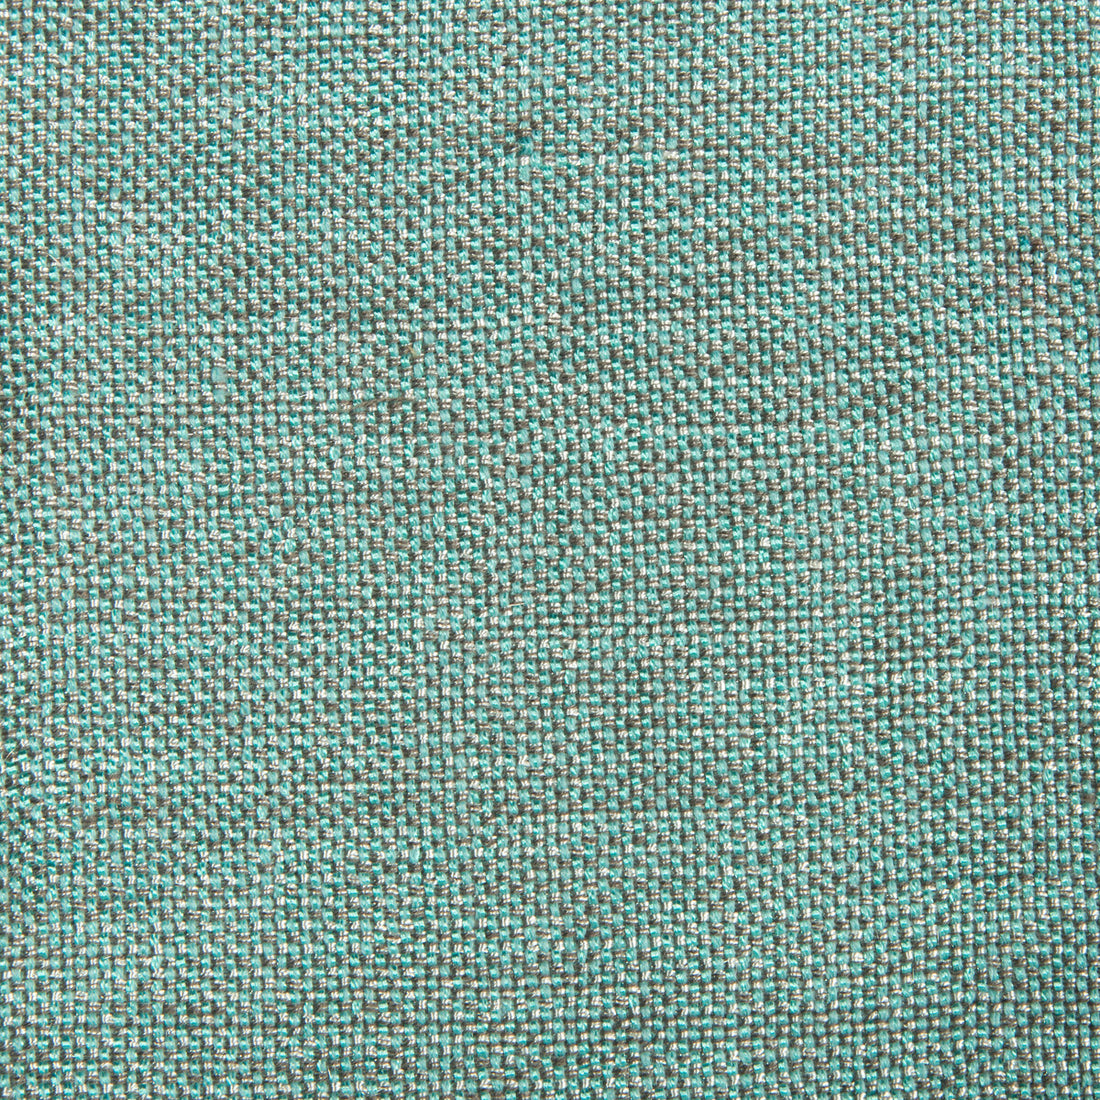 Kravet Contract fabric in 34926-1311 color - pattern 34926.1311.0 - by Kravet Contract